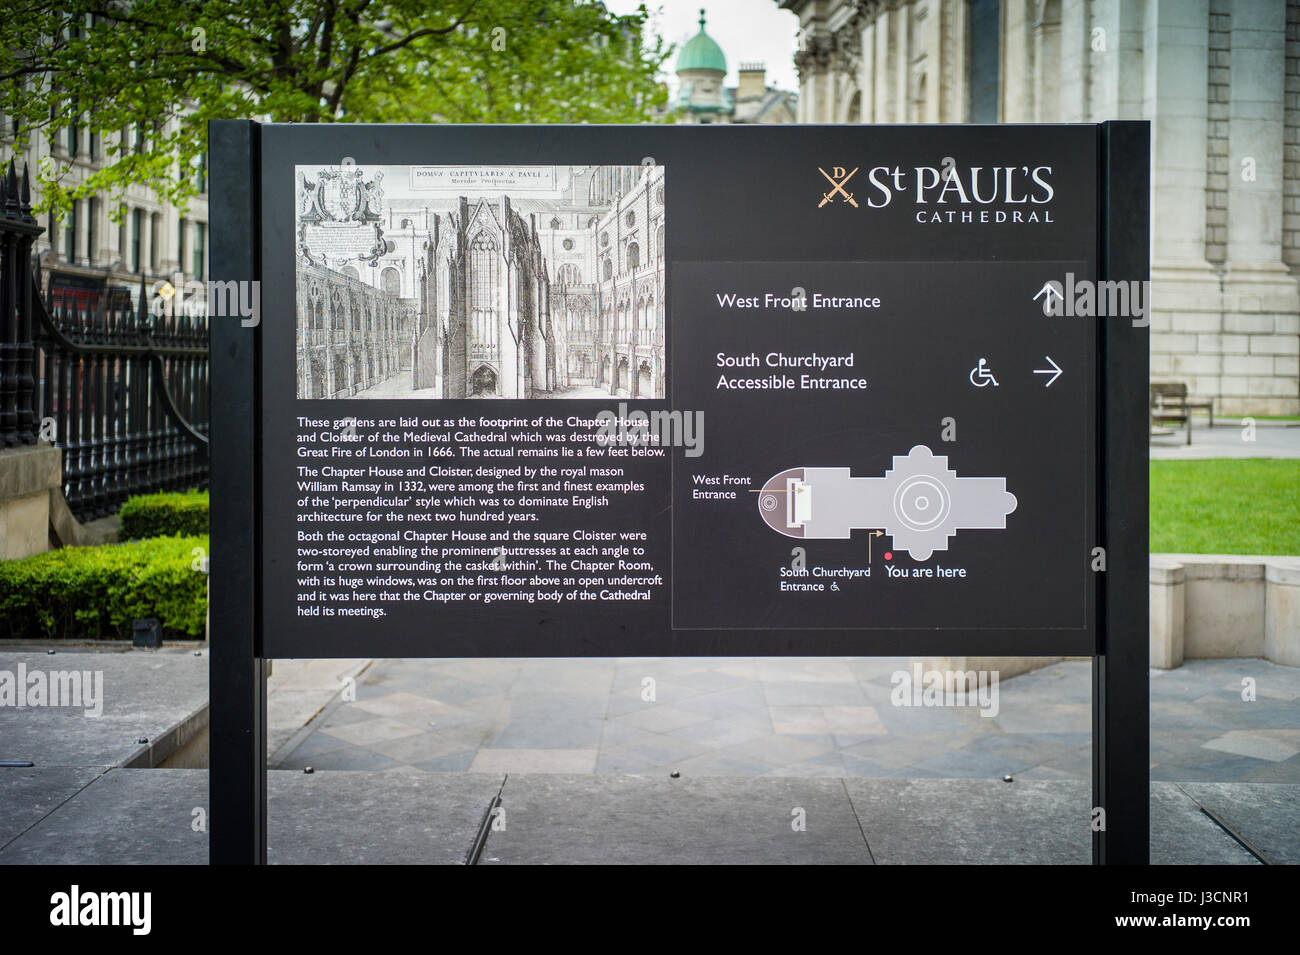 Information sign for the South Churchyard gardens at St Paul's Cathedral in London UK. This was the site of the original Chapter House and Cloister. Stock Photo